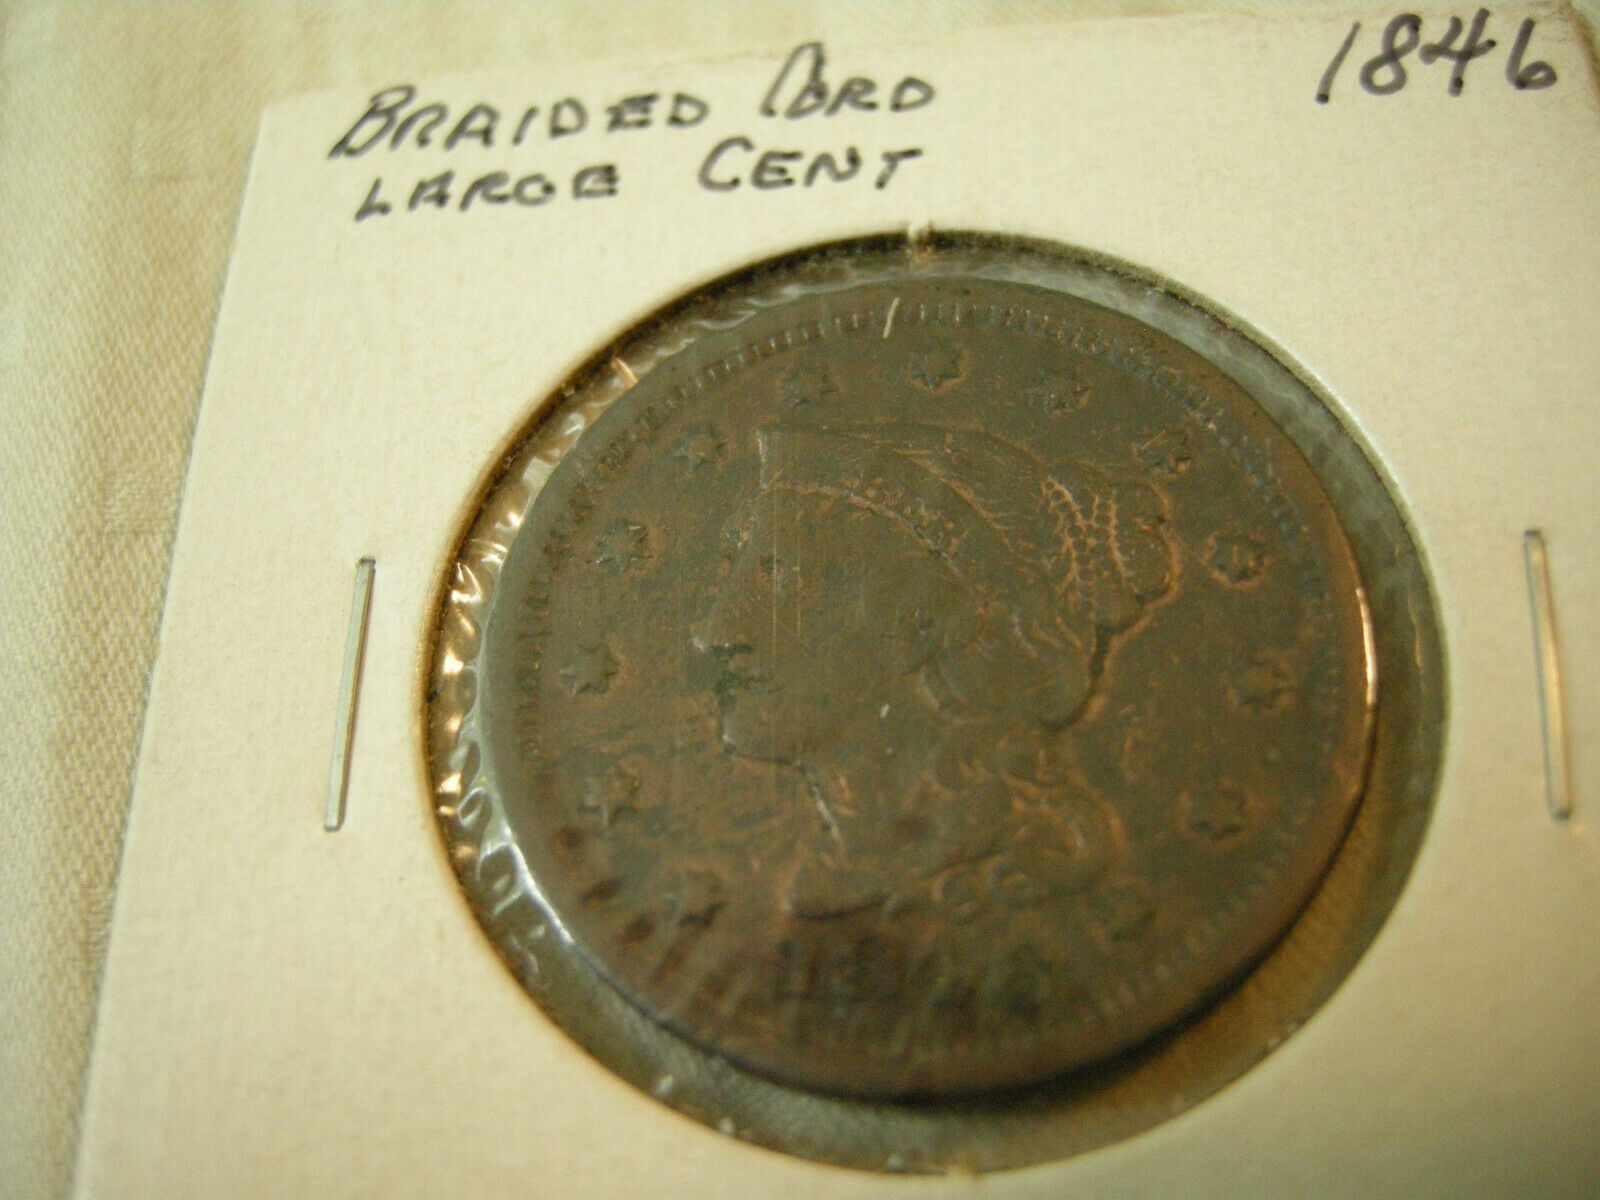 1846 Braided Hair Cord Large Cent Coin Copper Circulated Uncertified In Wrap